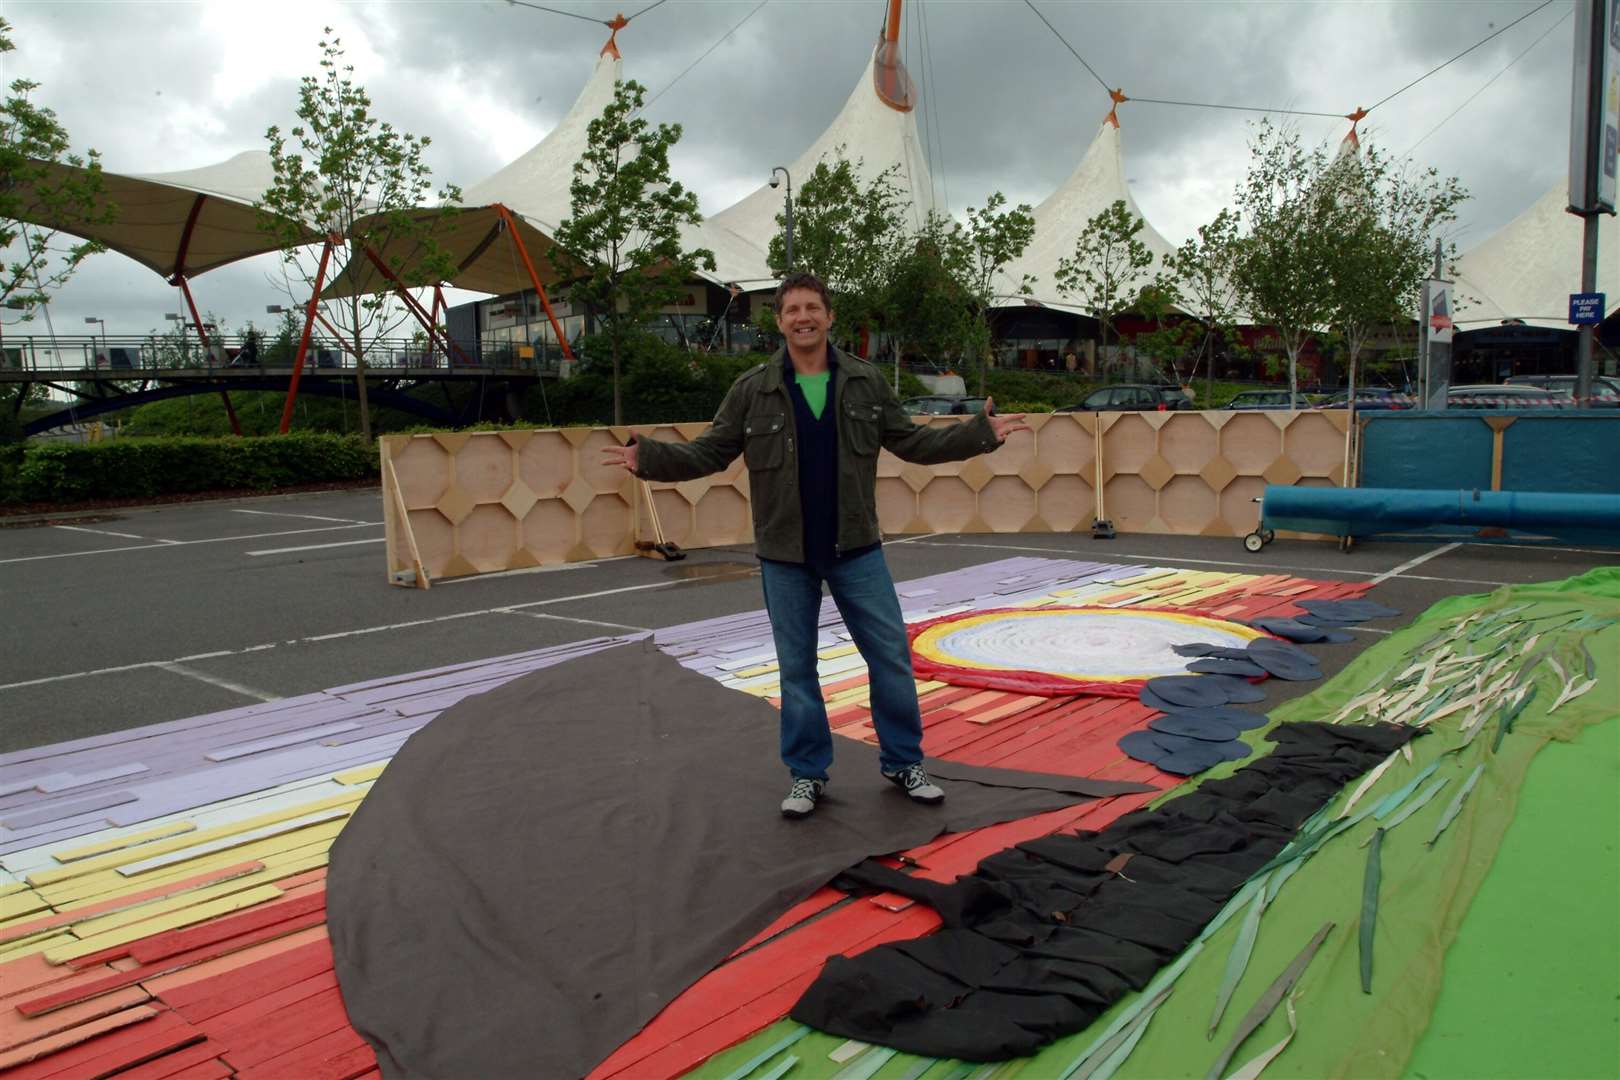 Neil Buchanan from TV show Art Attack with a giant mural of an Arab sailing boat in 2006